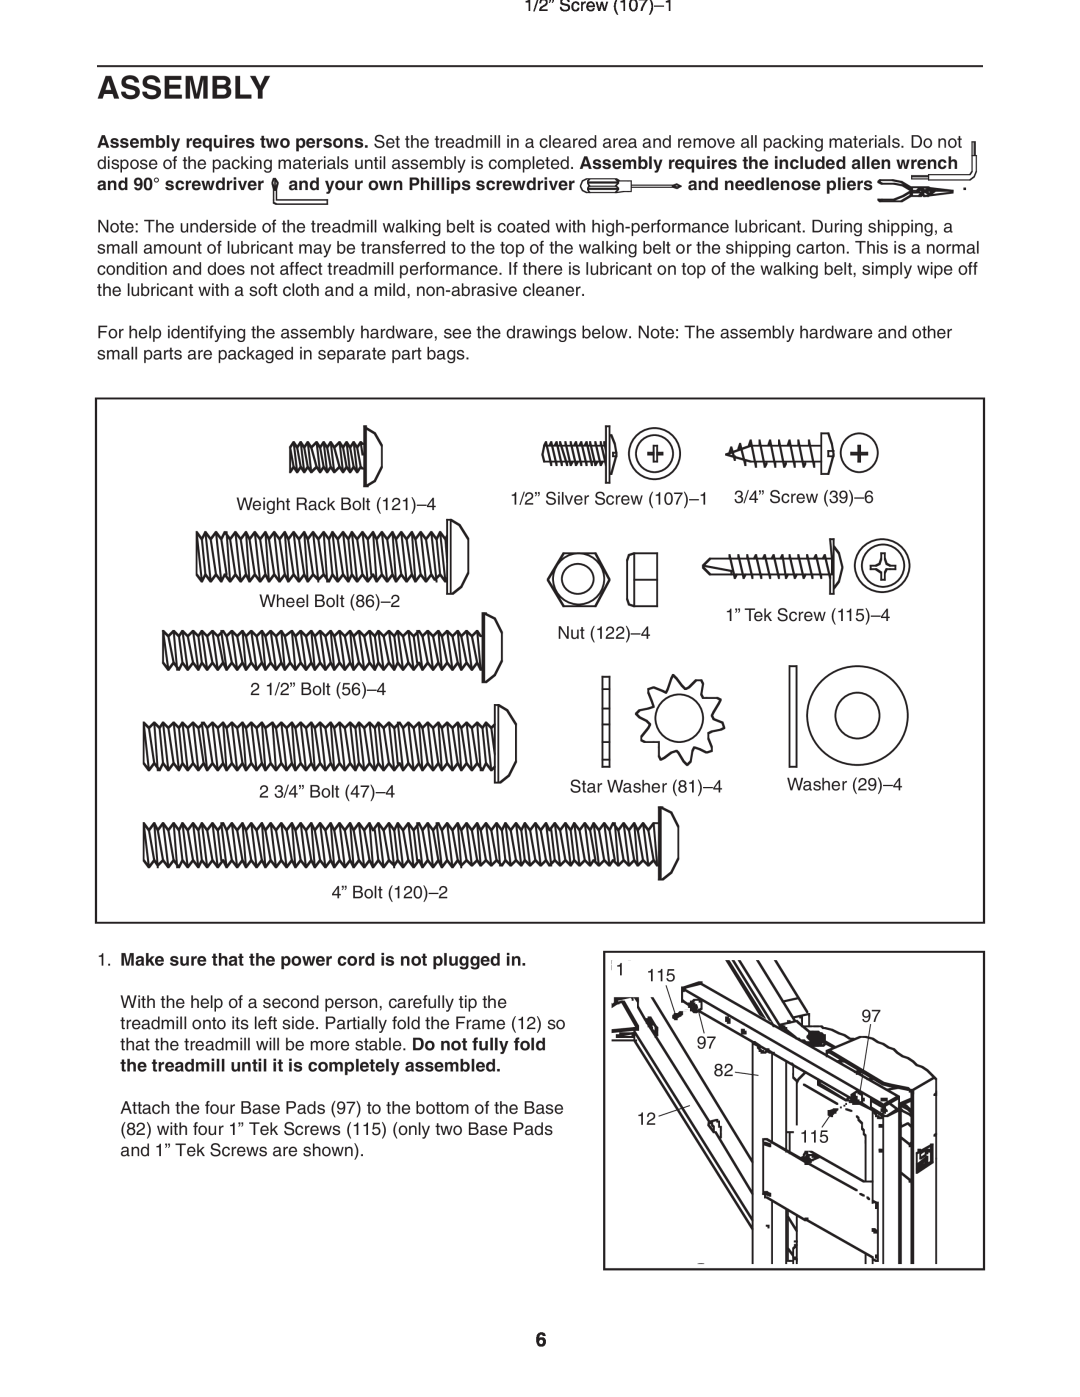 ProForm DTL4495C.0 user manual Assembly, Make sure that the power cord is not plugged in 